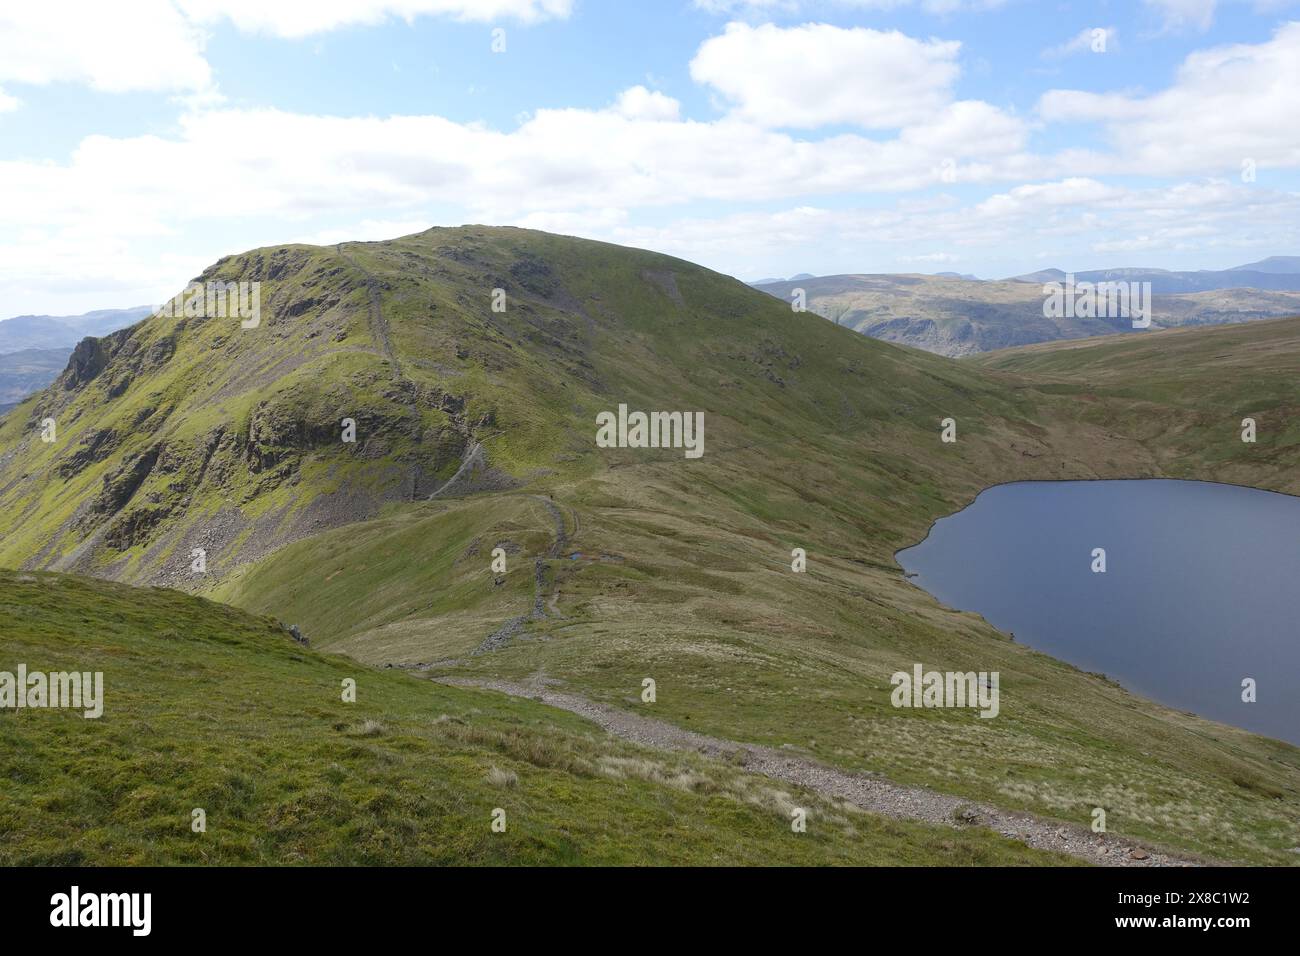 The Wainwright 'Seat Sandal' with Grisedale Tarn & Grisedale Hause from Path to 'Fairfield' in the Lake District National Park, Cumbria, England, UK. Stock Photo